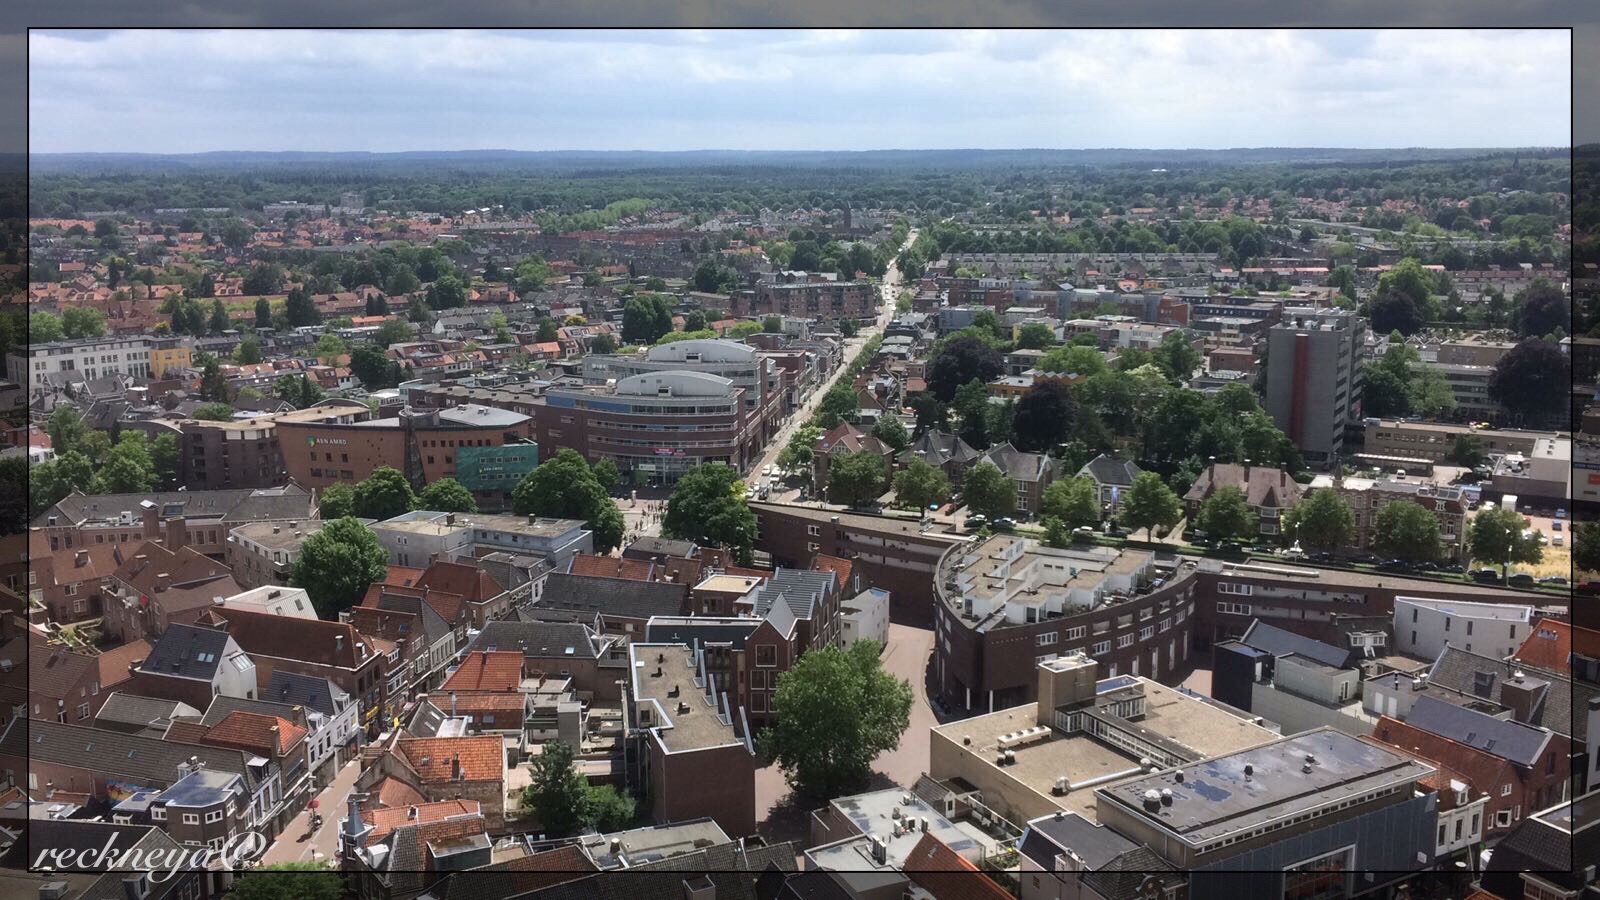 I took this photo when I was visiting the large medieval church tower in Amersfoort, some years ago. I was living in the student dorm house at the time, and enjoying that livestyle.